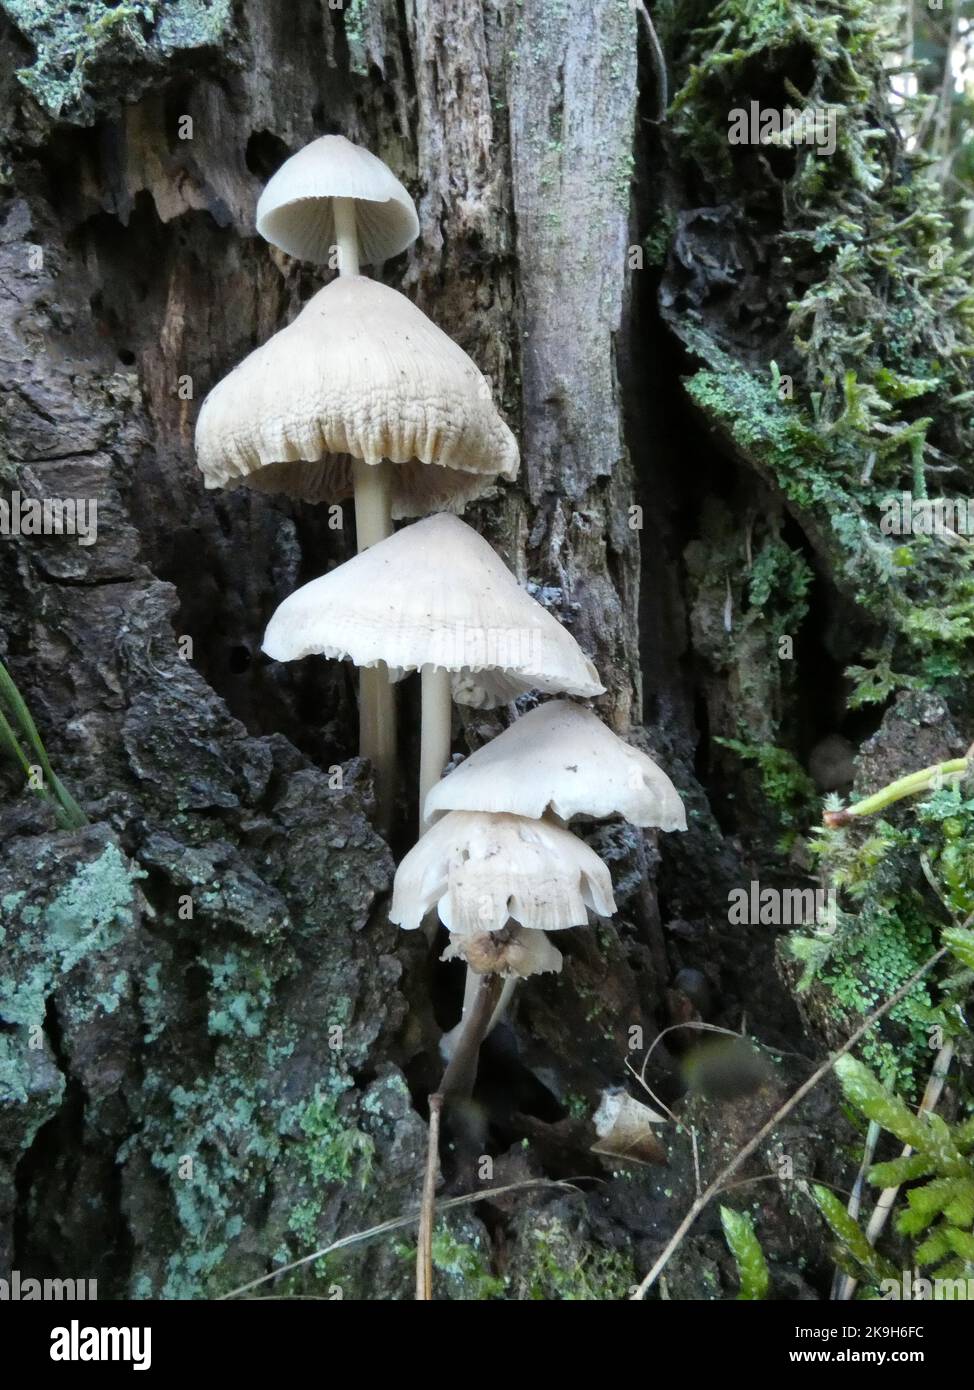 Mycena galericulata, common bonnet, toque mycena, common mycena or rosy-gill fairy helmet are the names of this cute group of mushrooms growing on a t Stock Photo